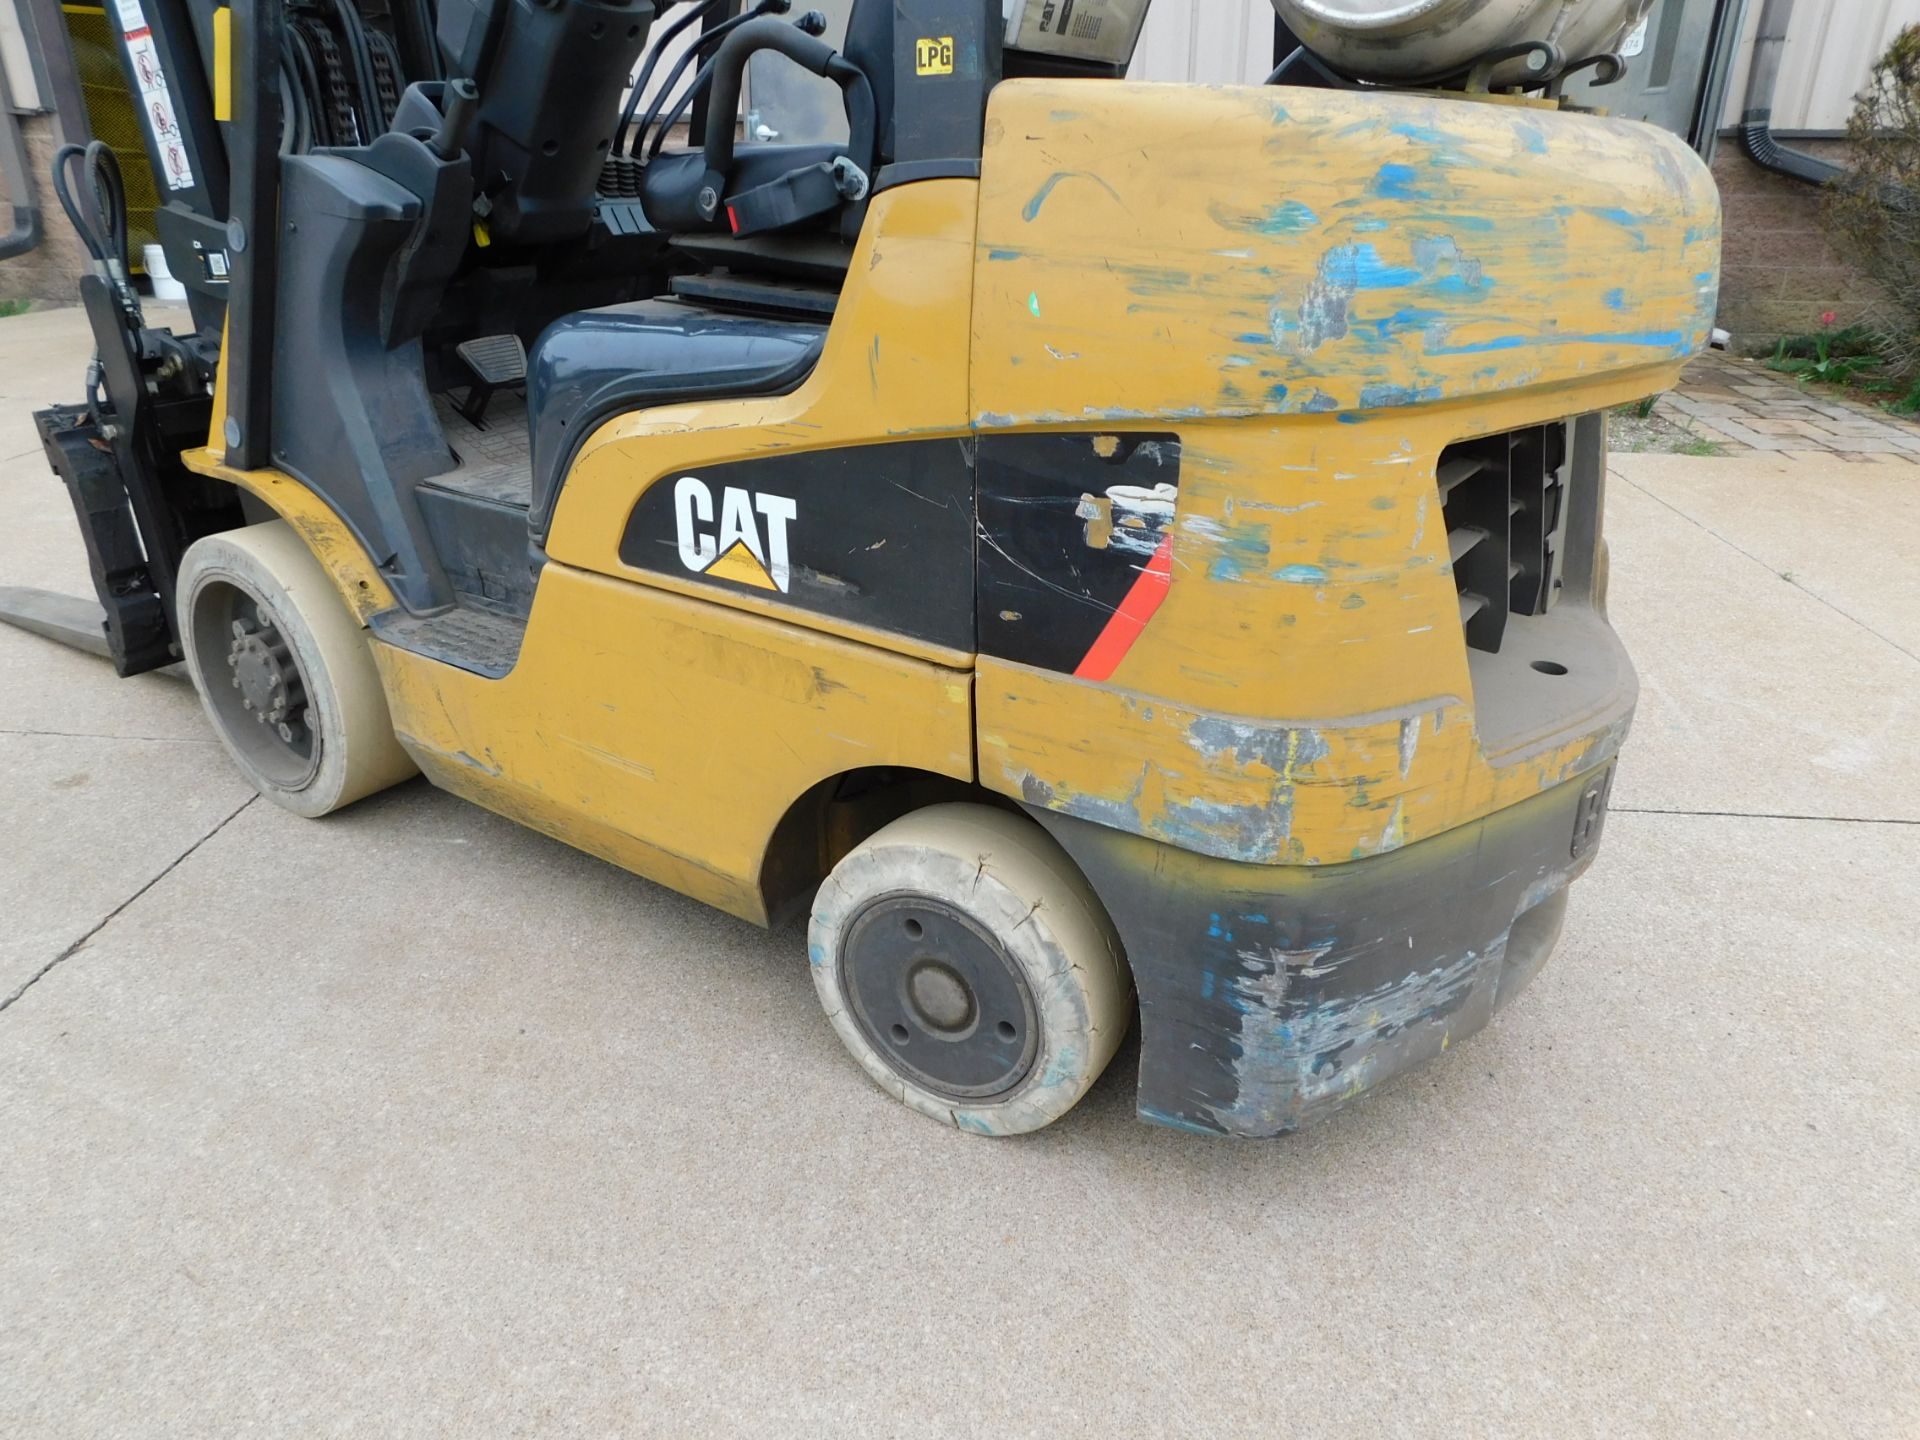 Caterpillar Model 2C6000 Forklift, SN AT83F40876, 4,500 lb cap., LP, Non-Marking Hard Tires, 3-Stage - Image 8 of 21